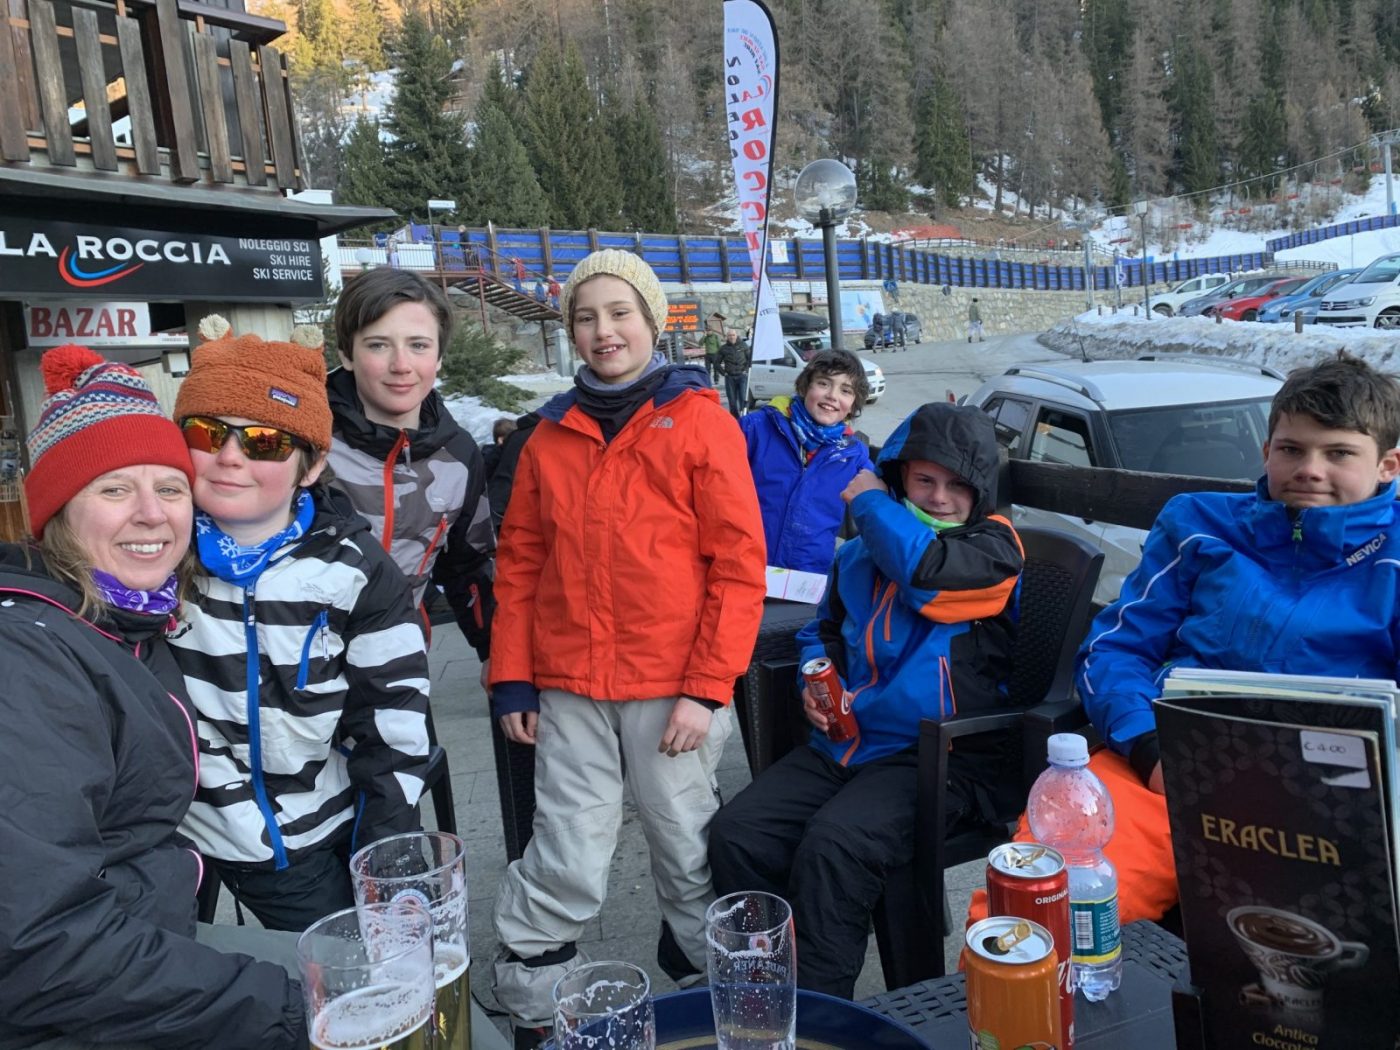 Part of the group at the après-ski by the top cablecar of Pila. Our half term ski-safari holiday based in the Valdigne of Aosta Valley- Courmayeur, Pila and La Thuile.